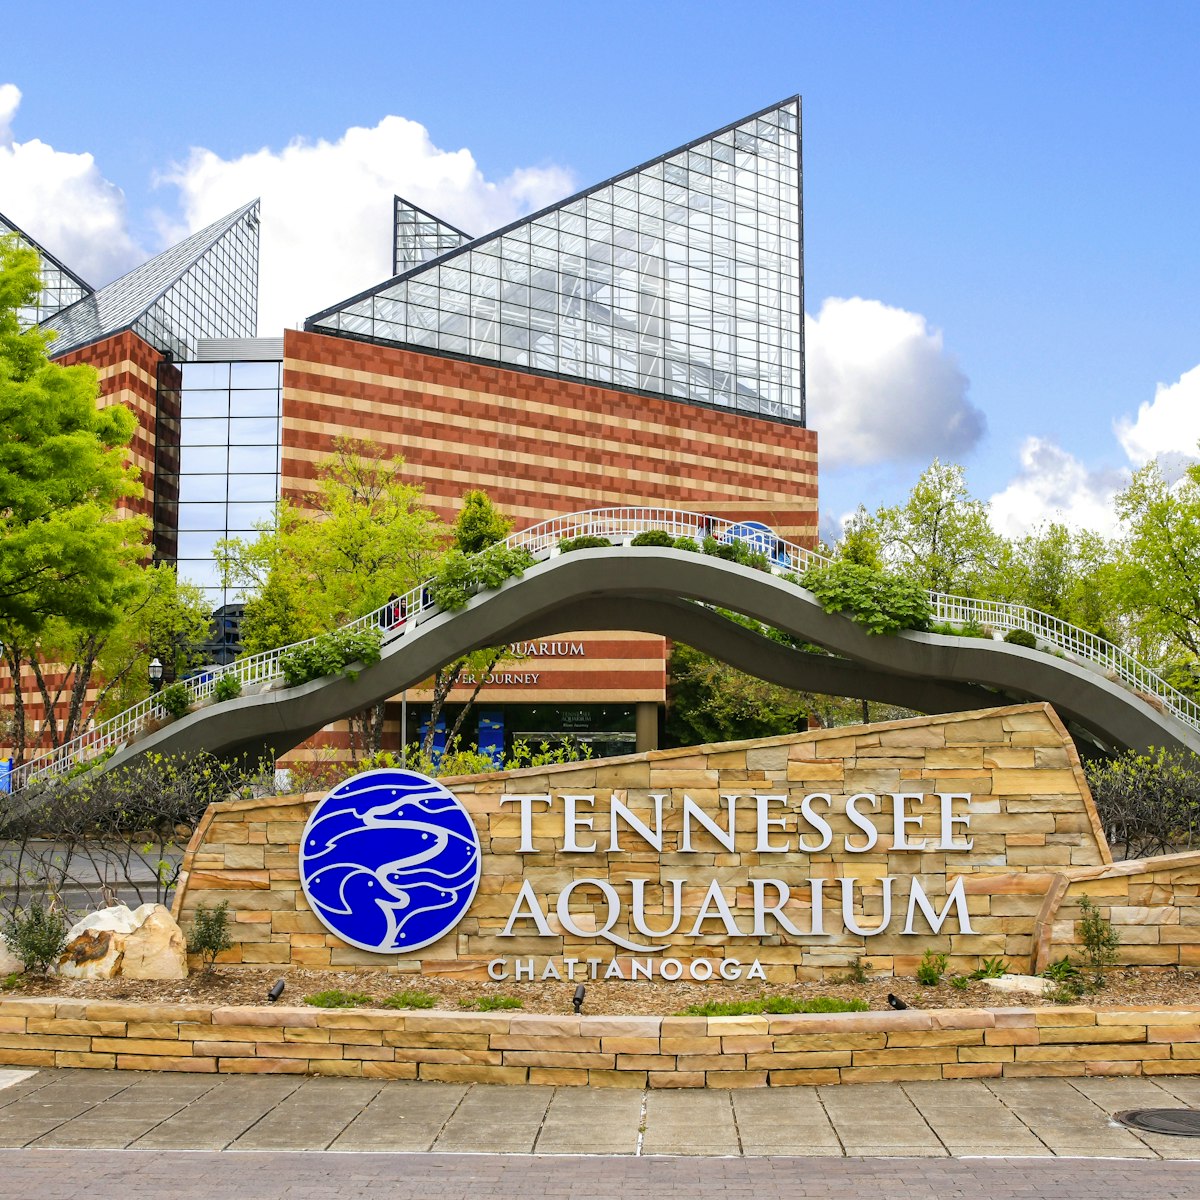 Welcome sign outside the Tennessee Aquarium building in Chattanooga, TN, USA